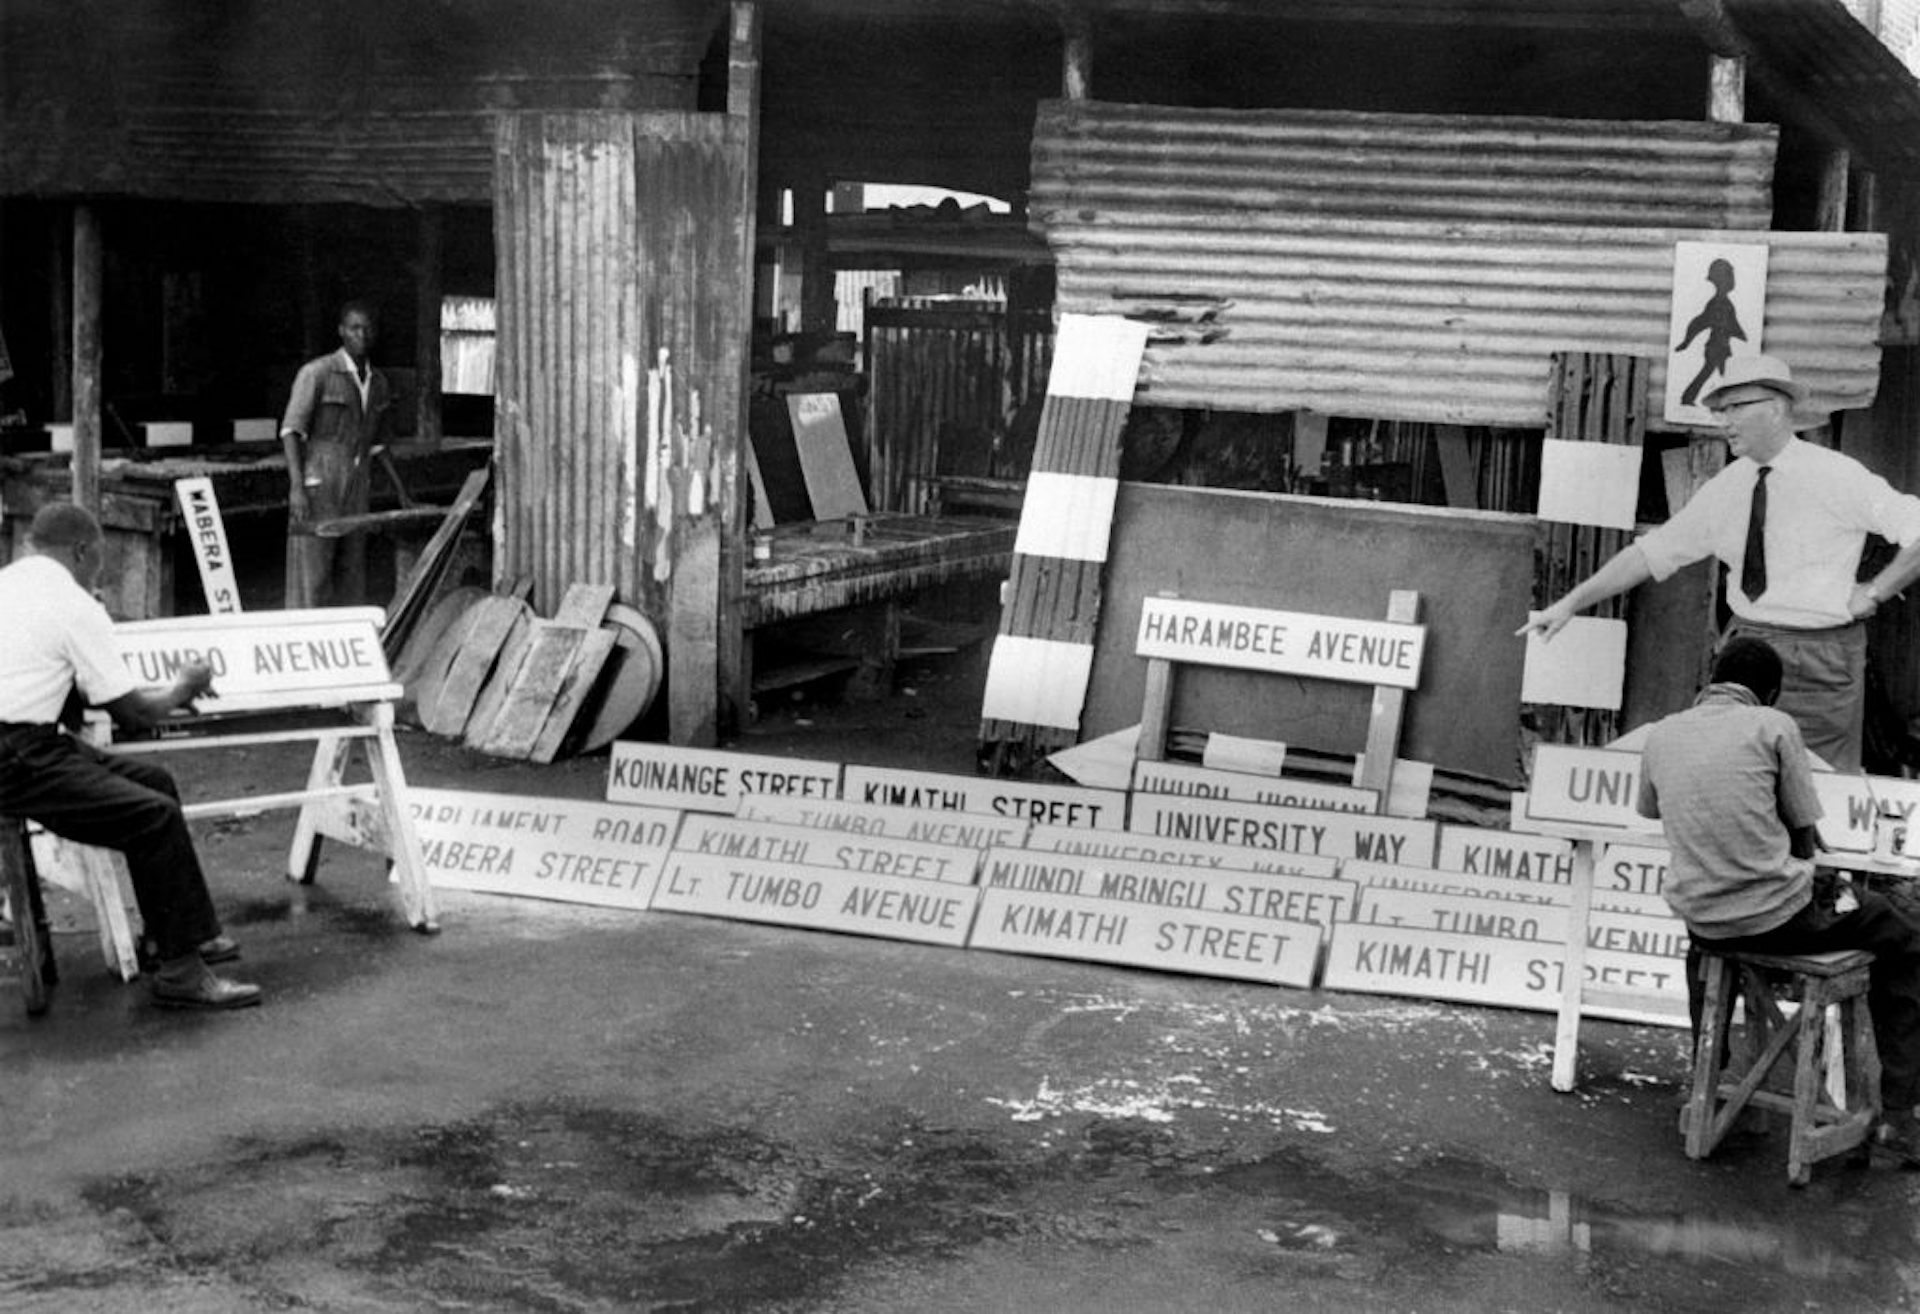 A black and white photo with signwriters painting street names on street signs